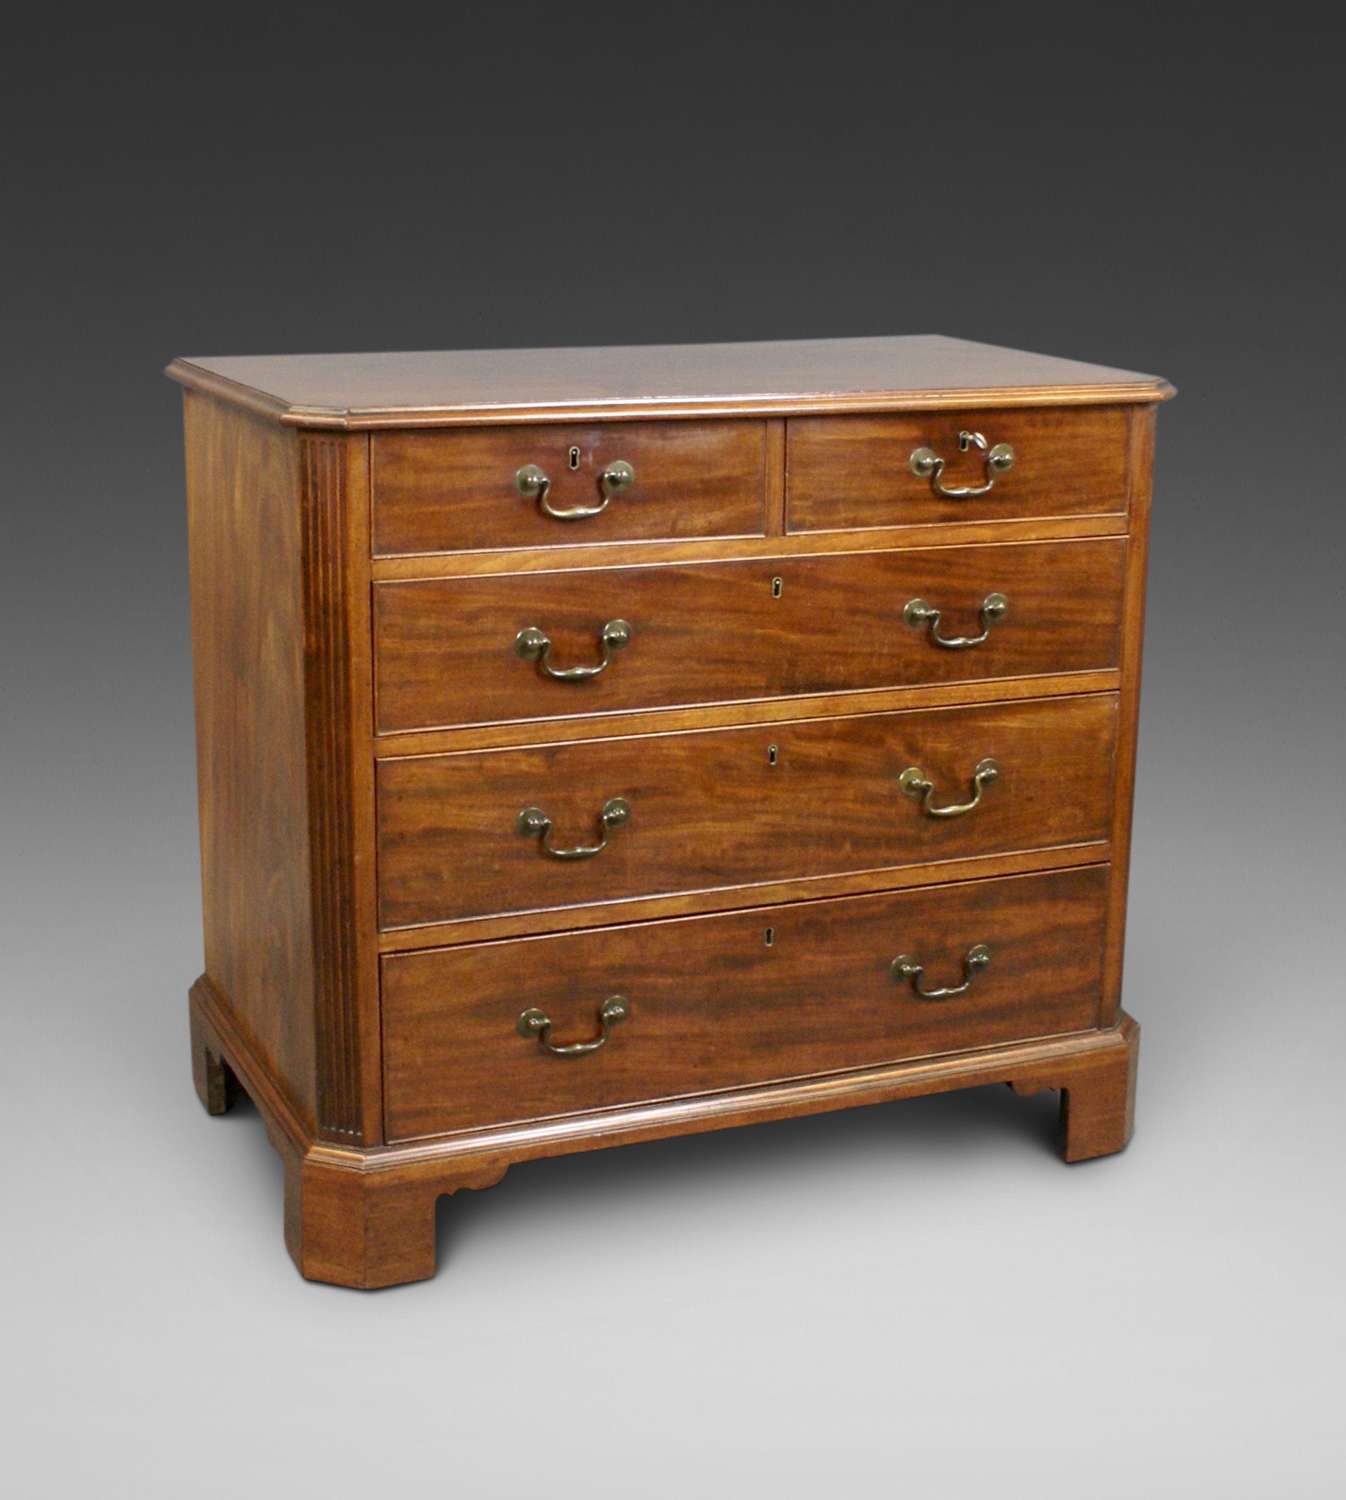 A George III Chippendale period mahogany chest of drawers